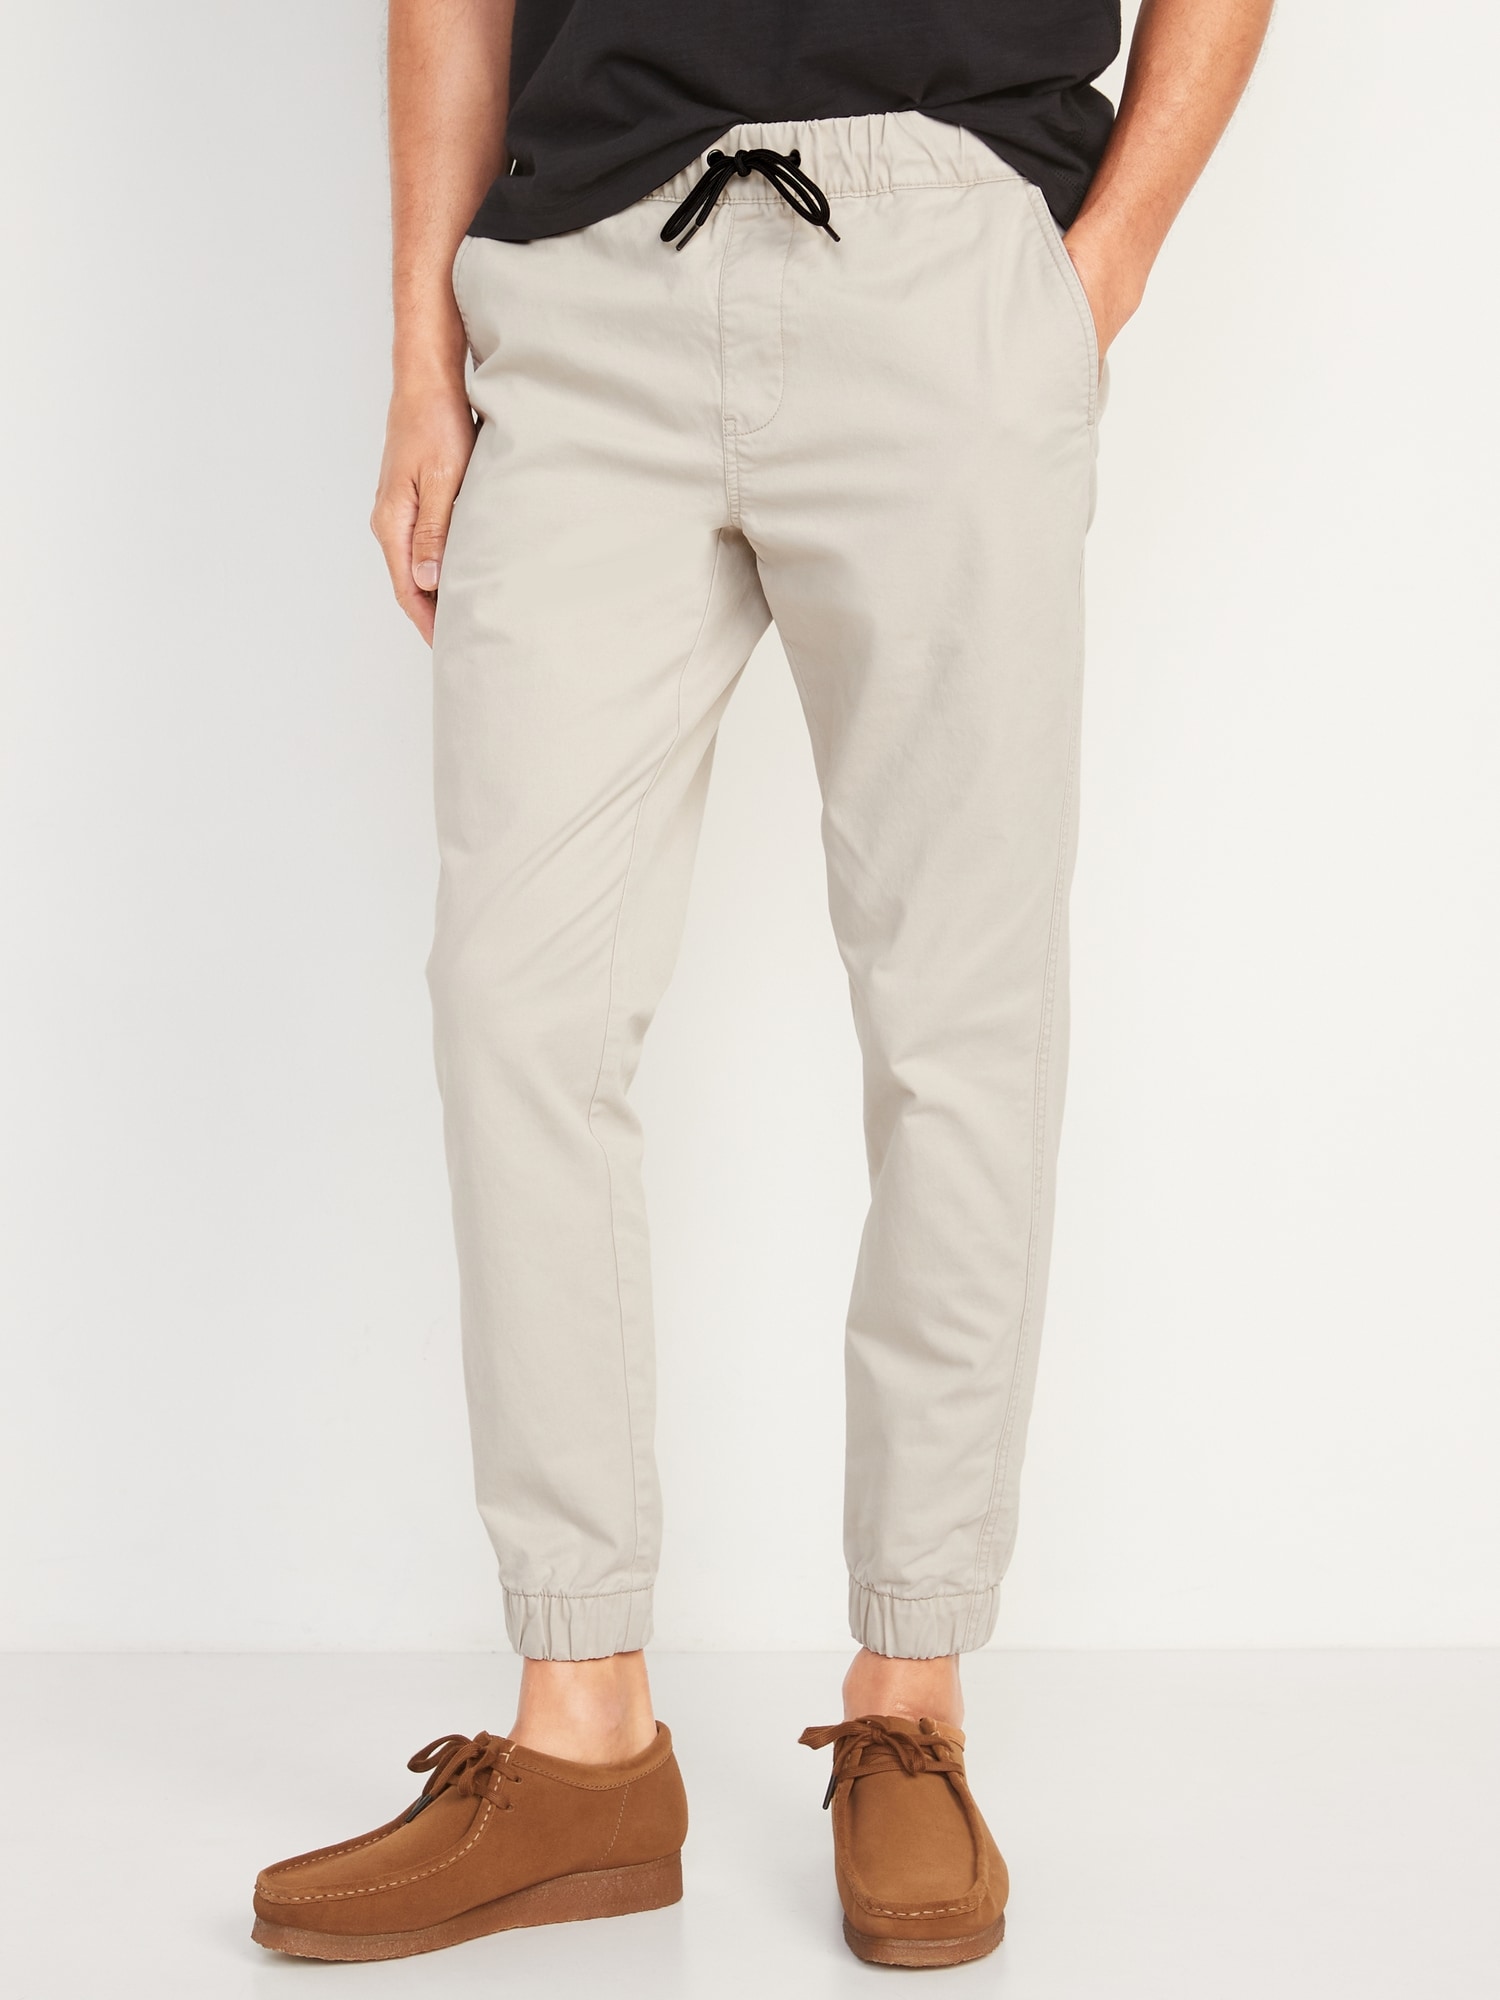 Loose Taper NonStretch 94 Cargo Pants for Men  Old Navy